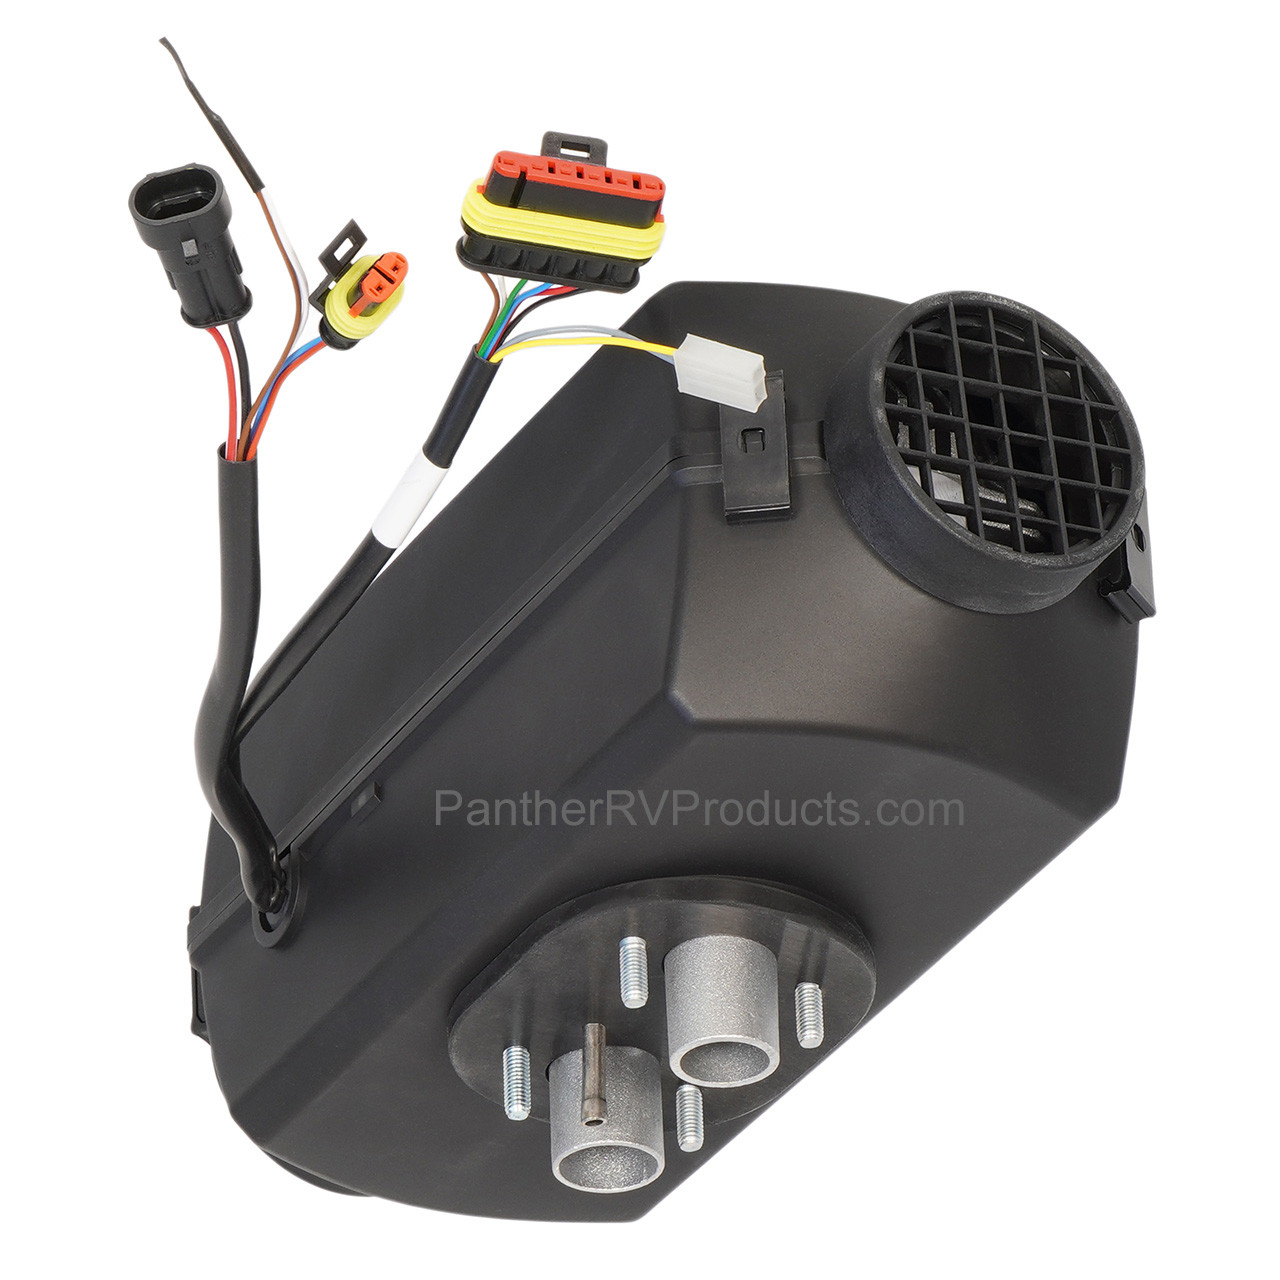 Air heater - Air 2D - Autoterm LLC - diesel / for boat / for yachts